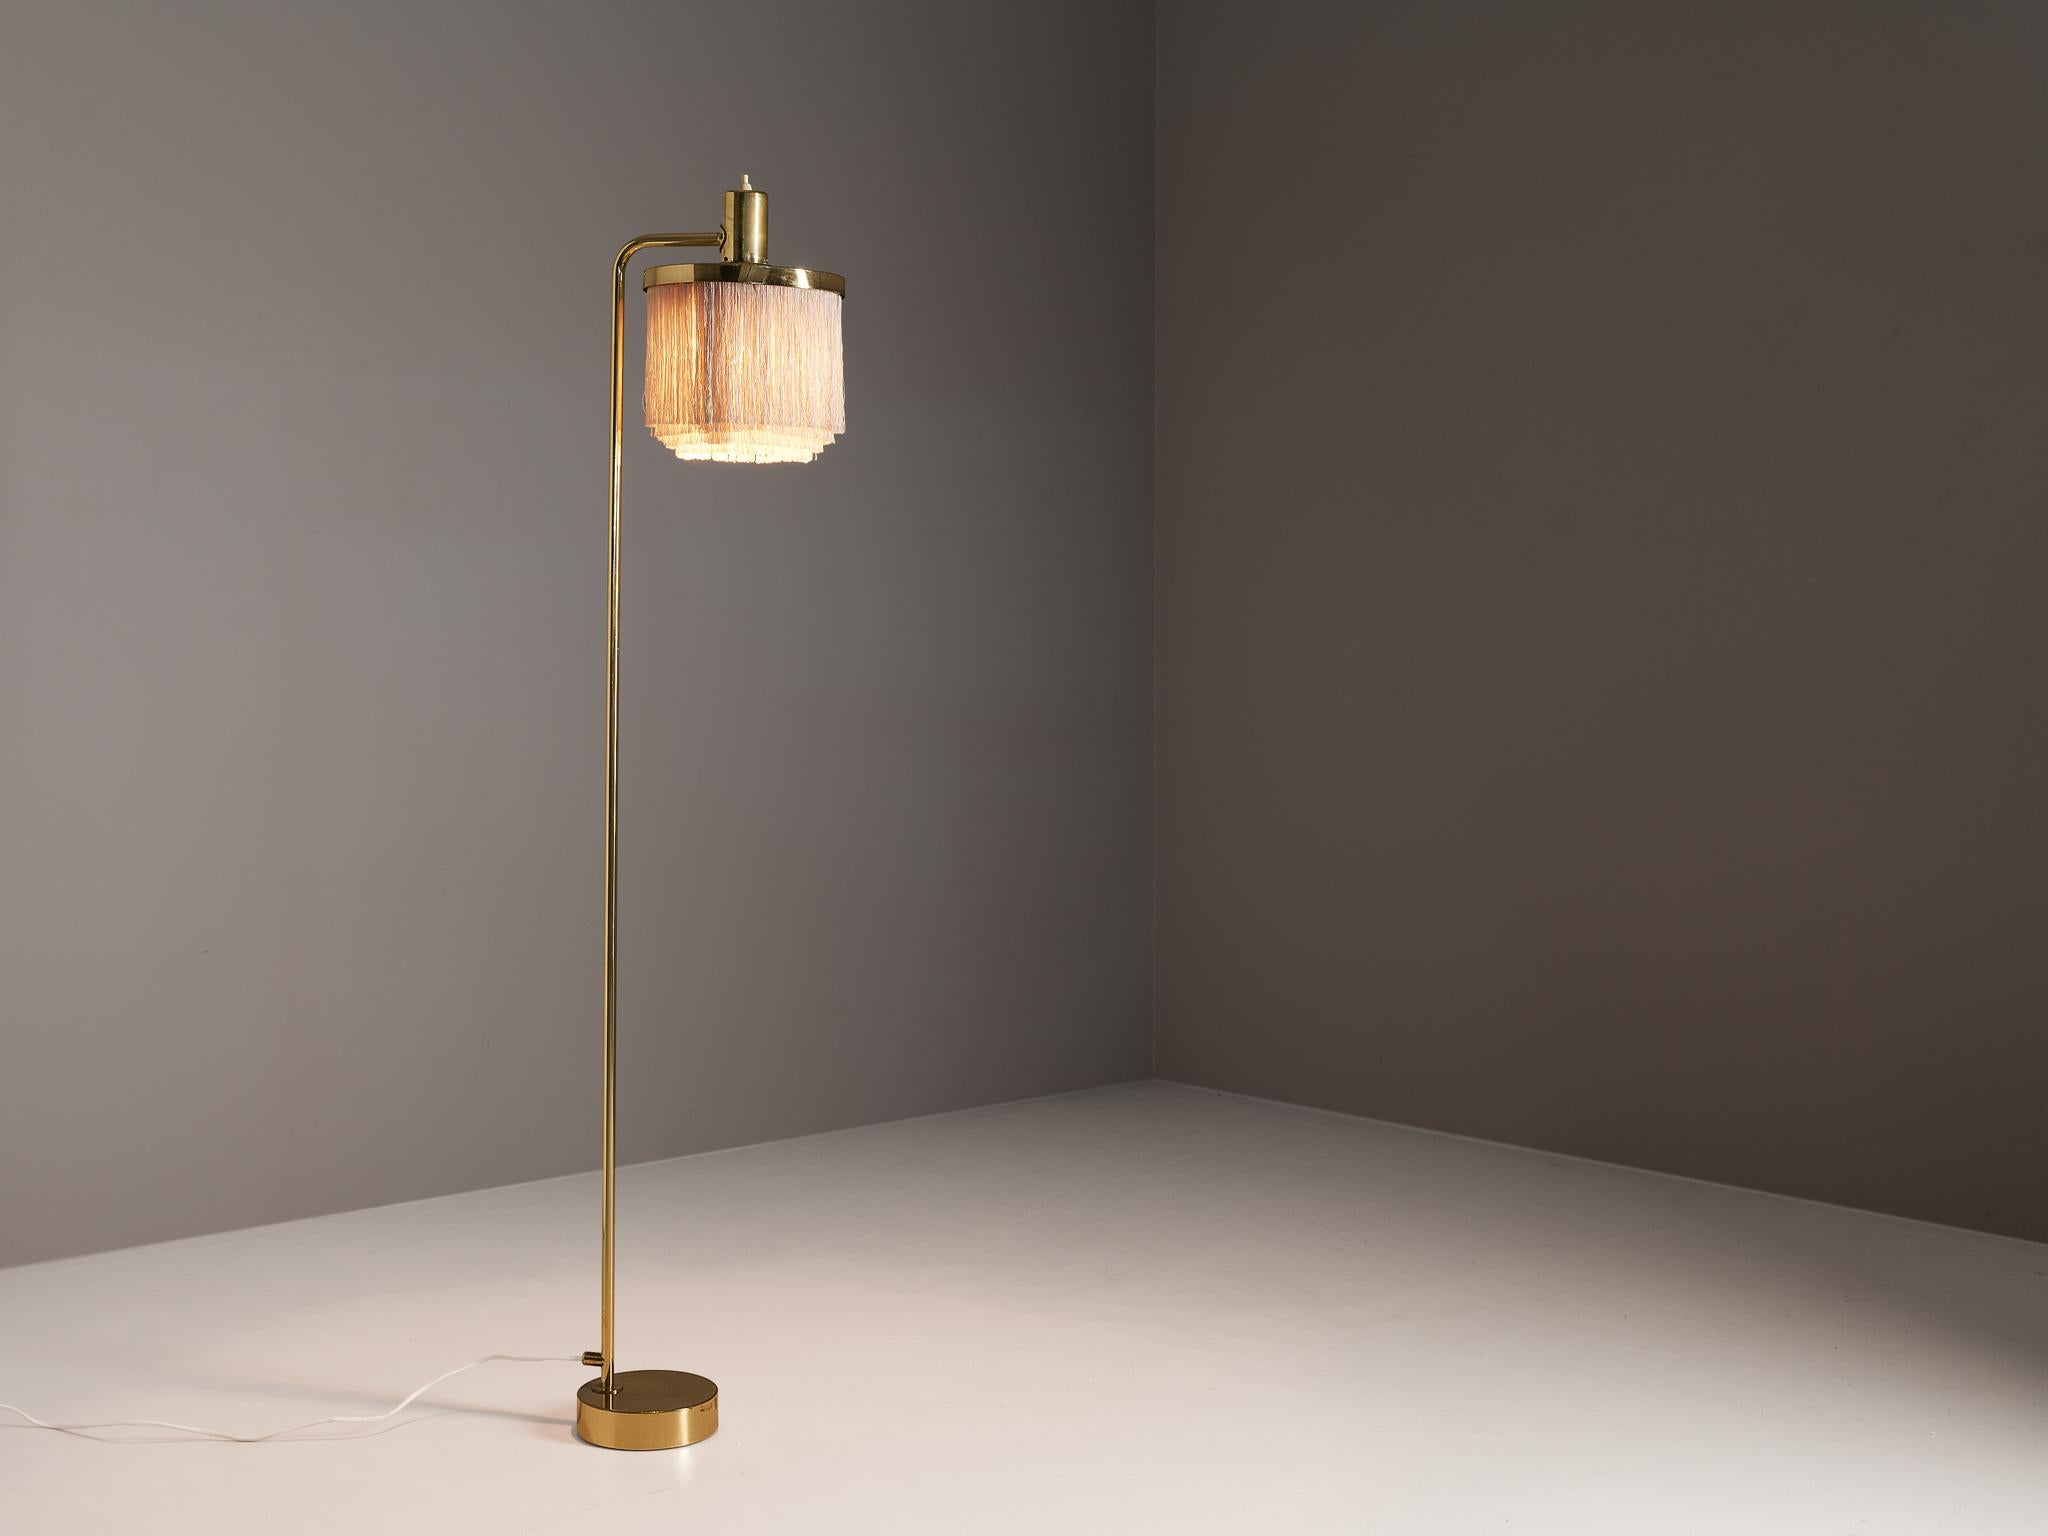 Hans-Agne Jakobsson manufactured in Markaryd, floor lamp 'G109', brass, silk string, Sweden, 1950s

Floor lamp model ‘G109’ by Swedish designer Hans-Agne Jakobssen. From a small round brass base starts the thin stem. The shade resting on top